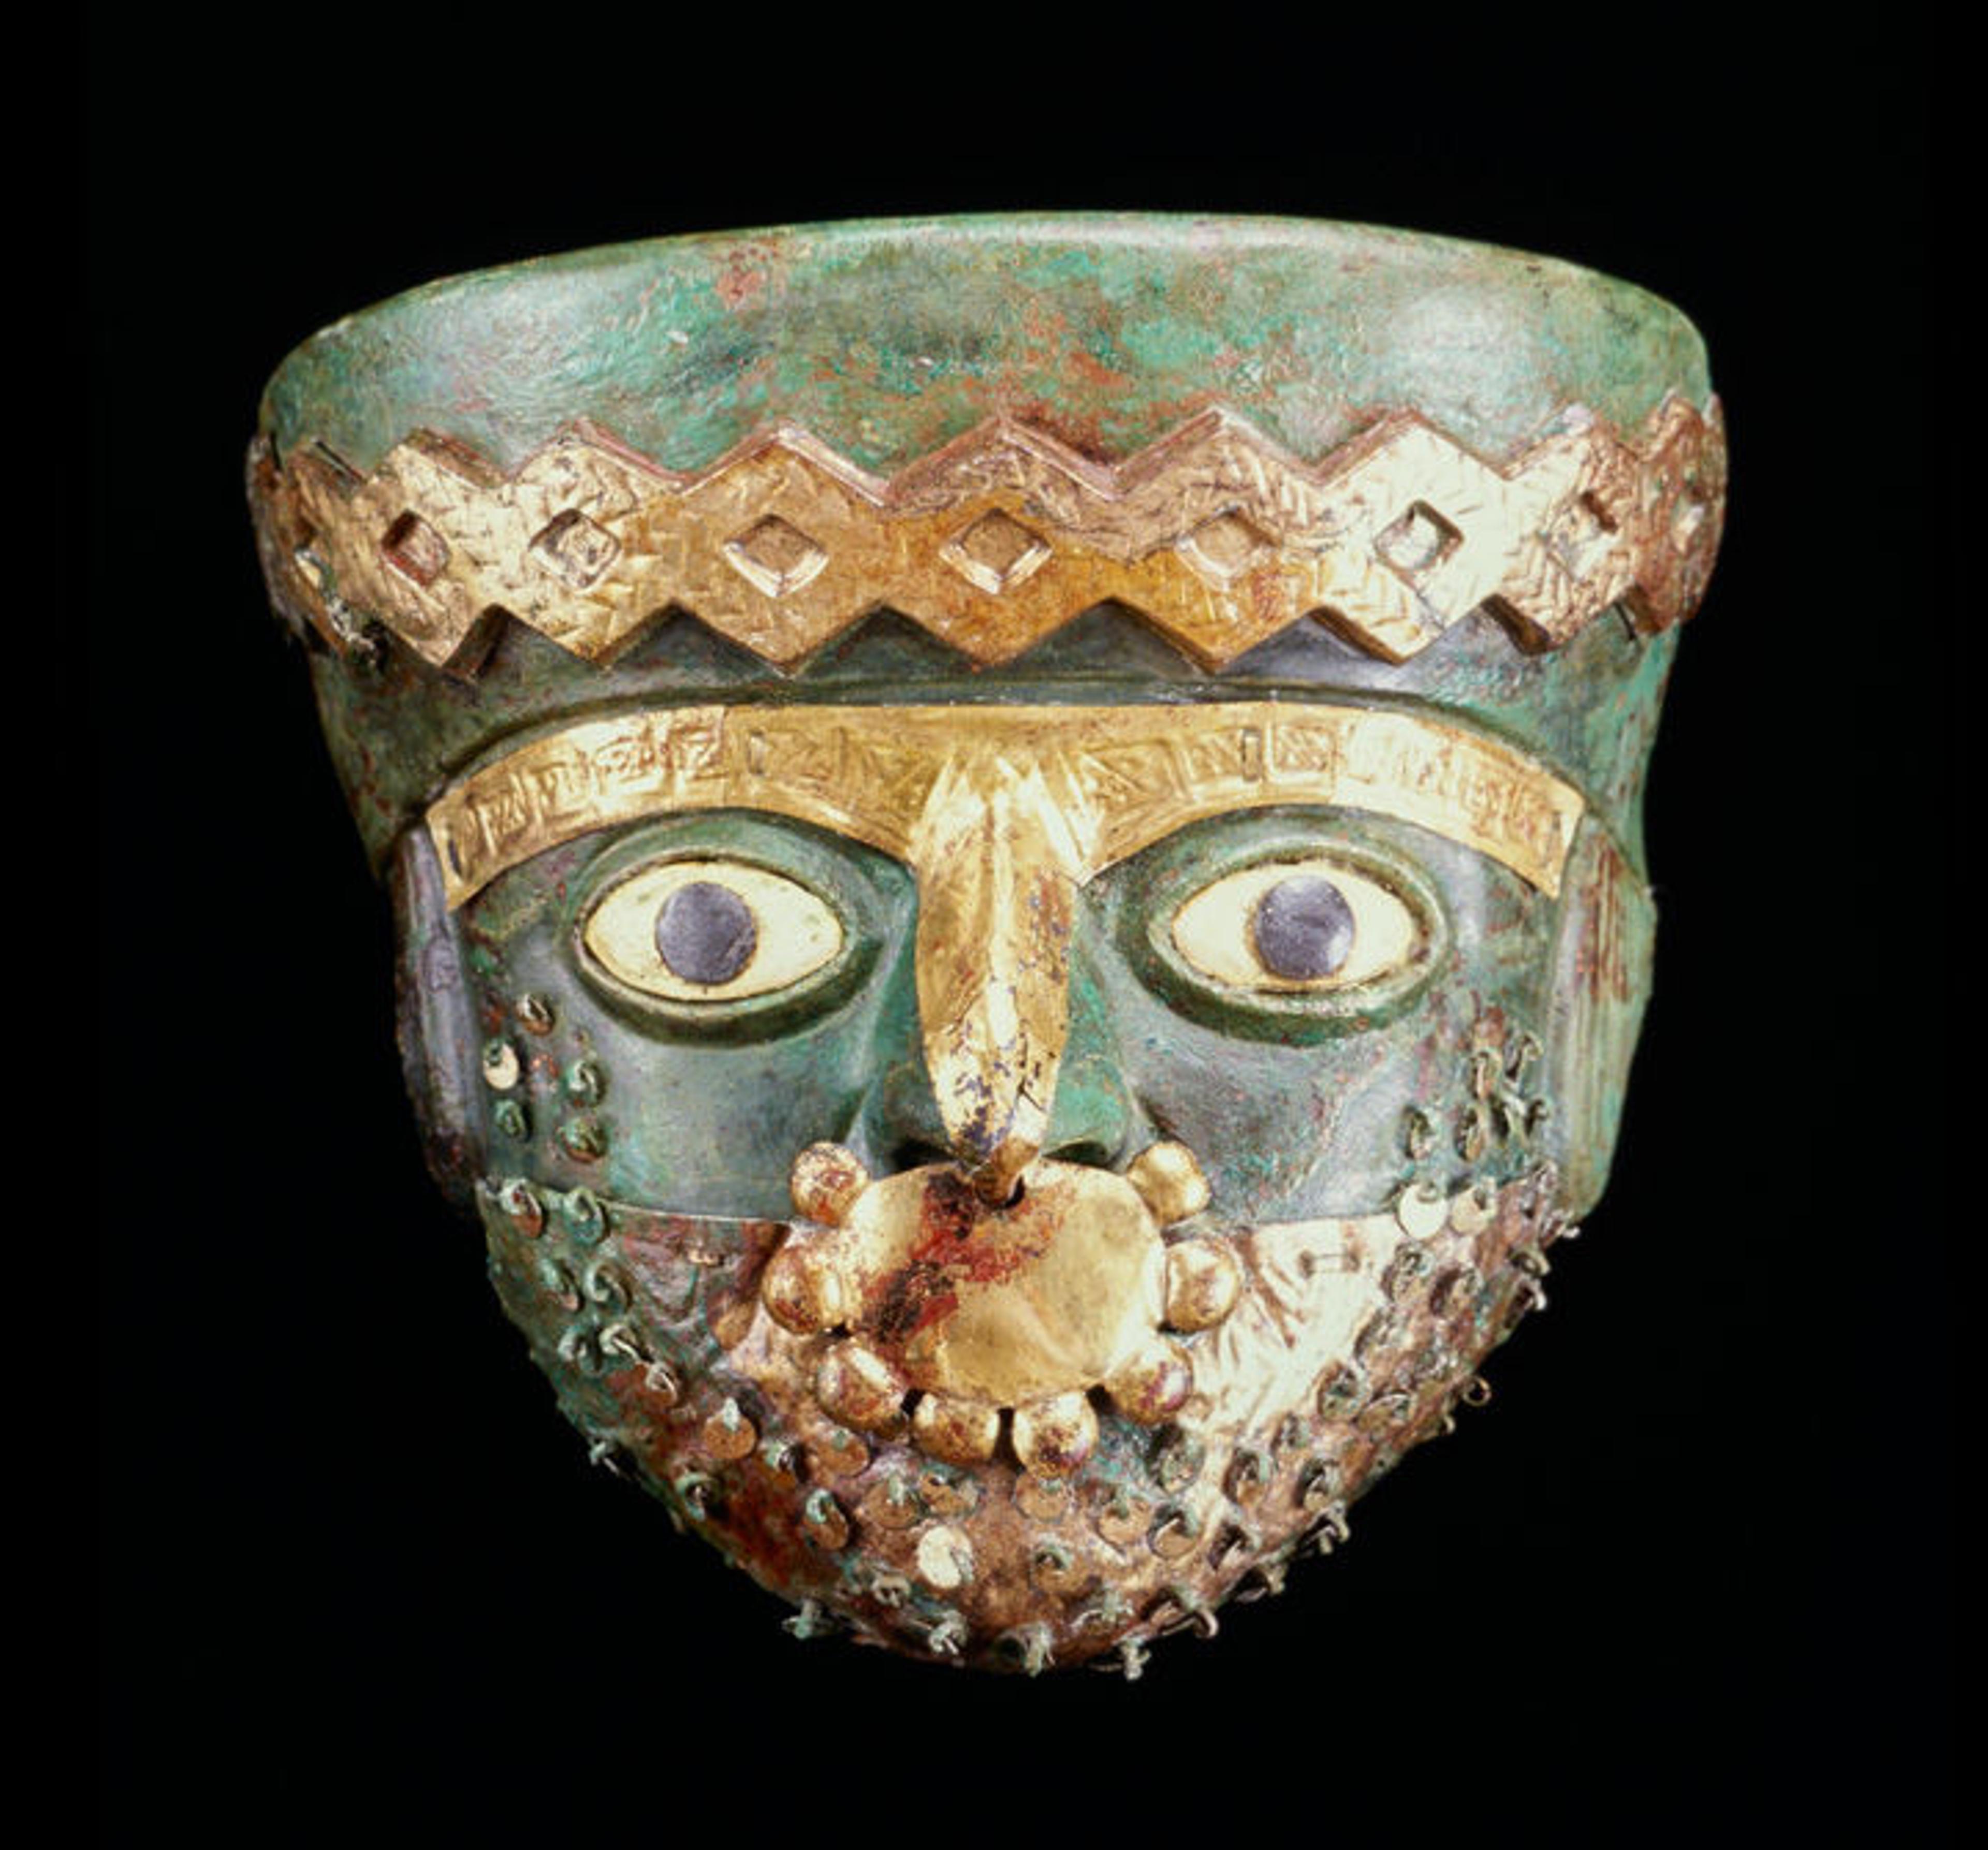 A Moche burial mask from ca. A.D. 550 made of copper, gilded copper, shell, and stone